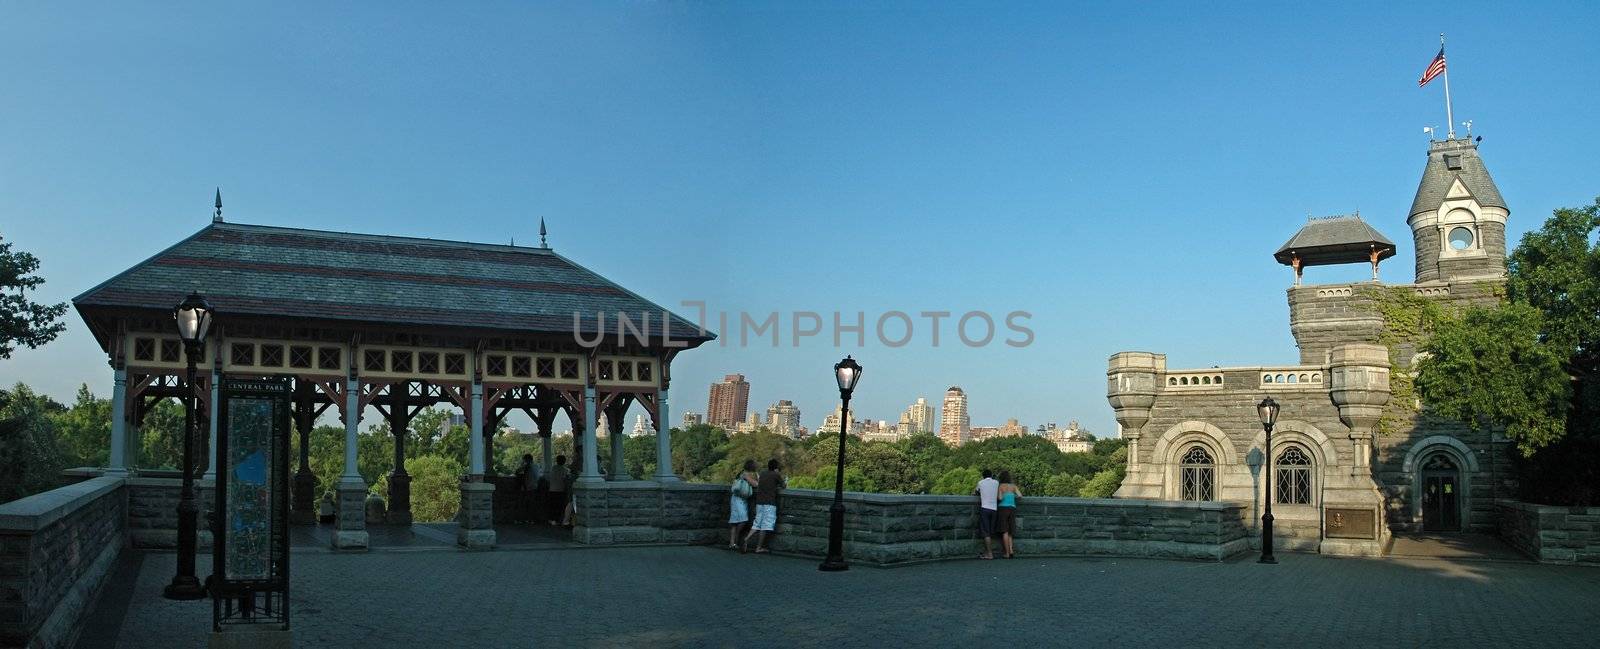 Belvedere Castle in Central Park - New York City, USA, panorama photo